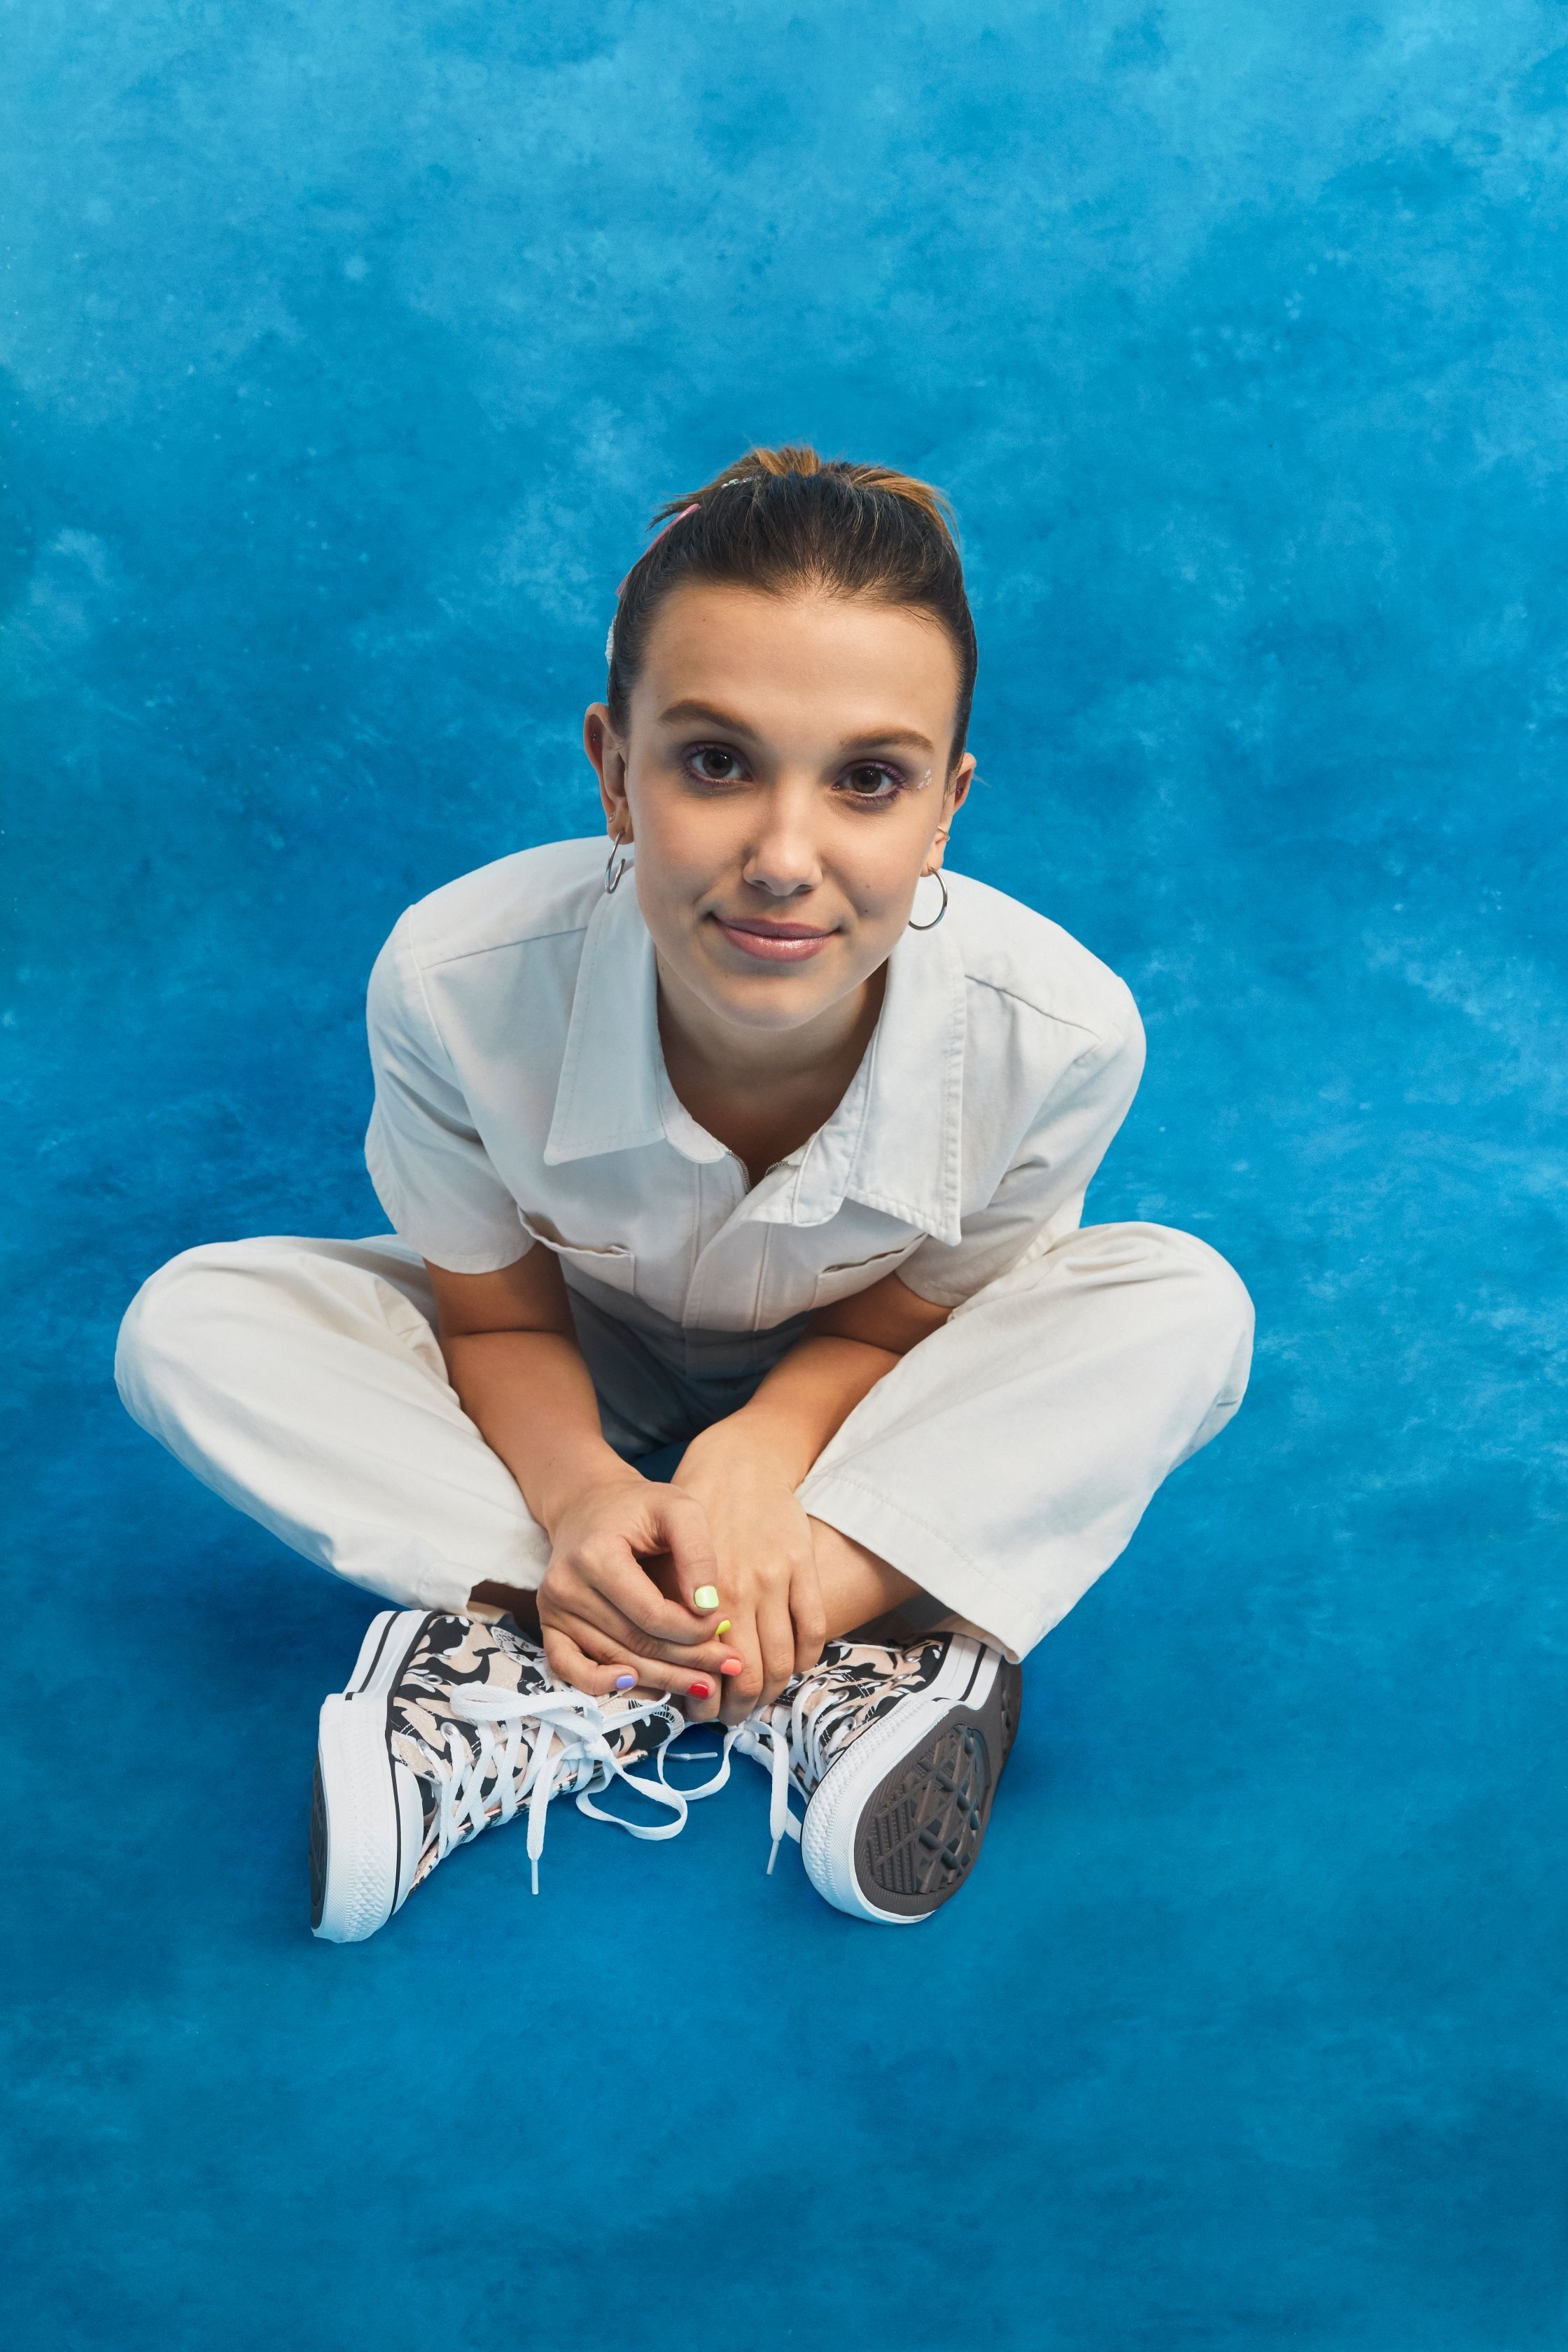 millie bobby brown converse photoshoot